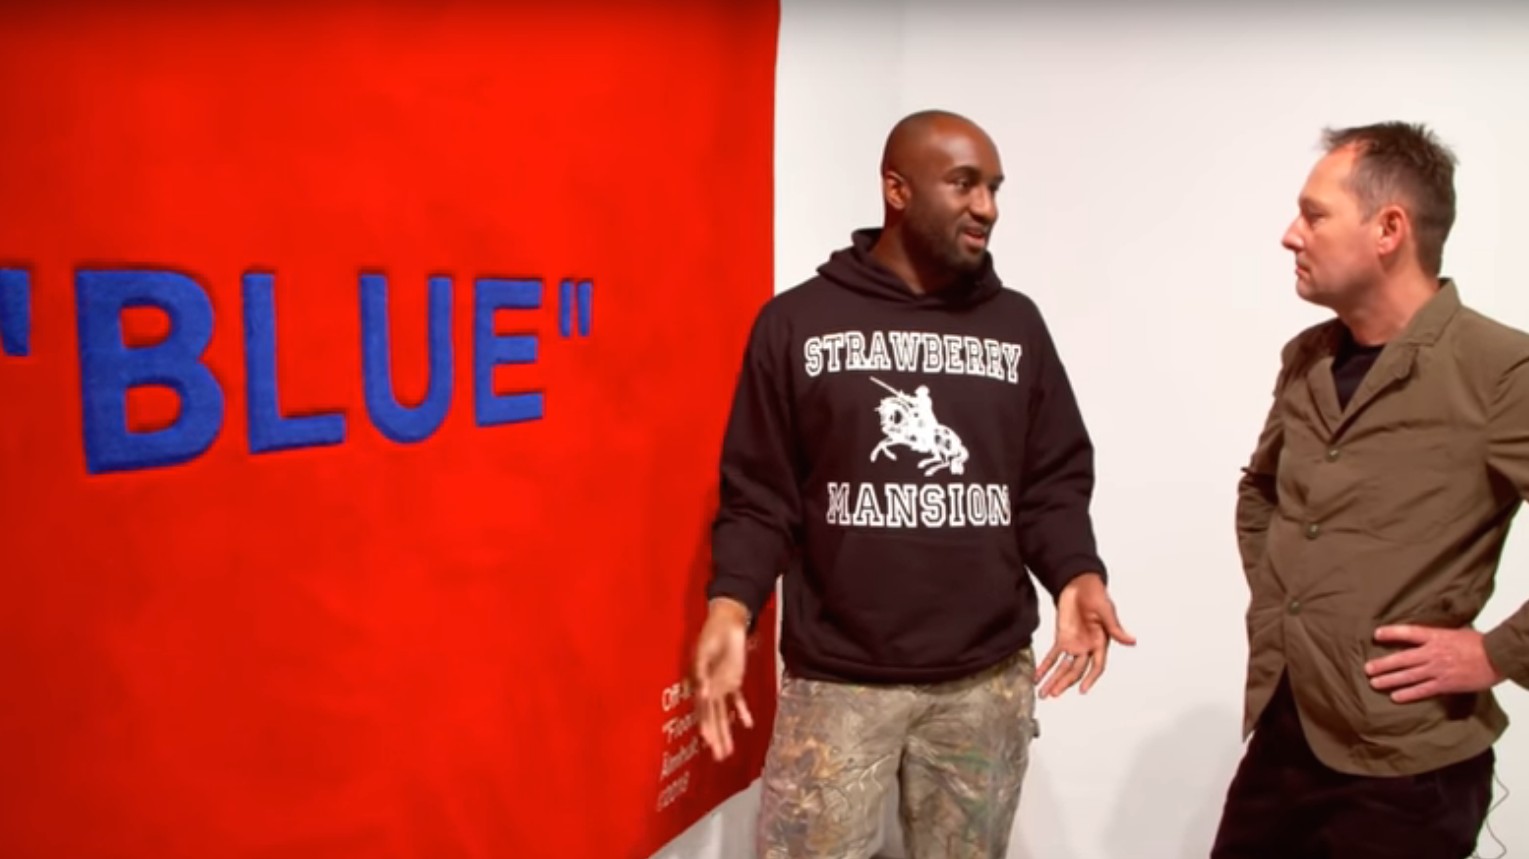 The Virgil Abloh x IKEA Collection Is Finally Here